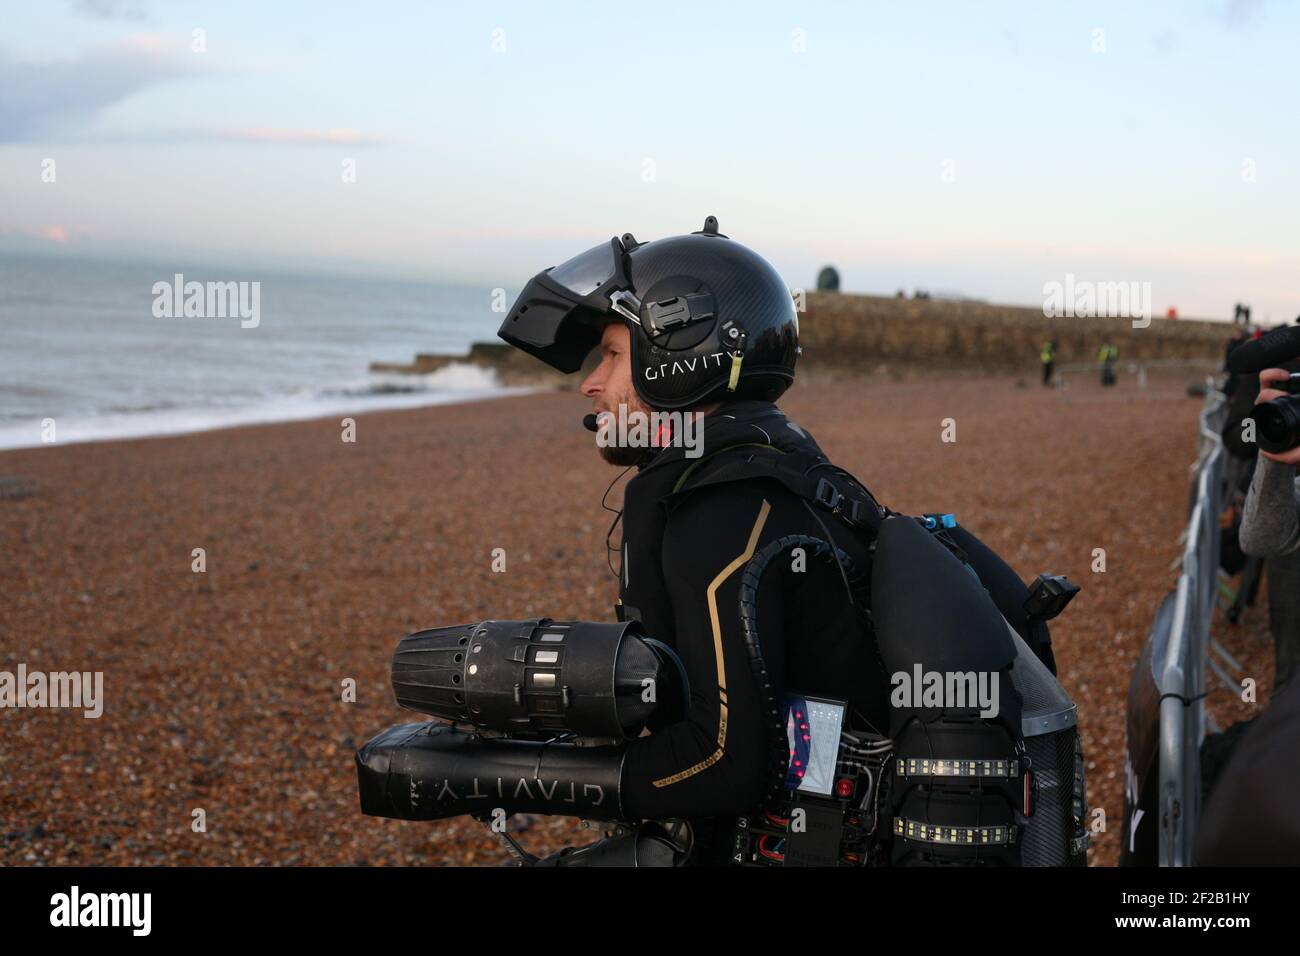 English inventor Richard Browning on Brighton beach during his successful attempt to break the world record for fastest jetpack in November 2019. Stock Photo